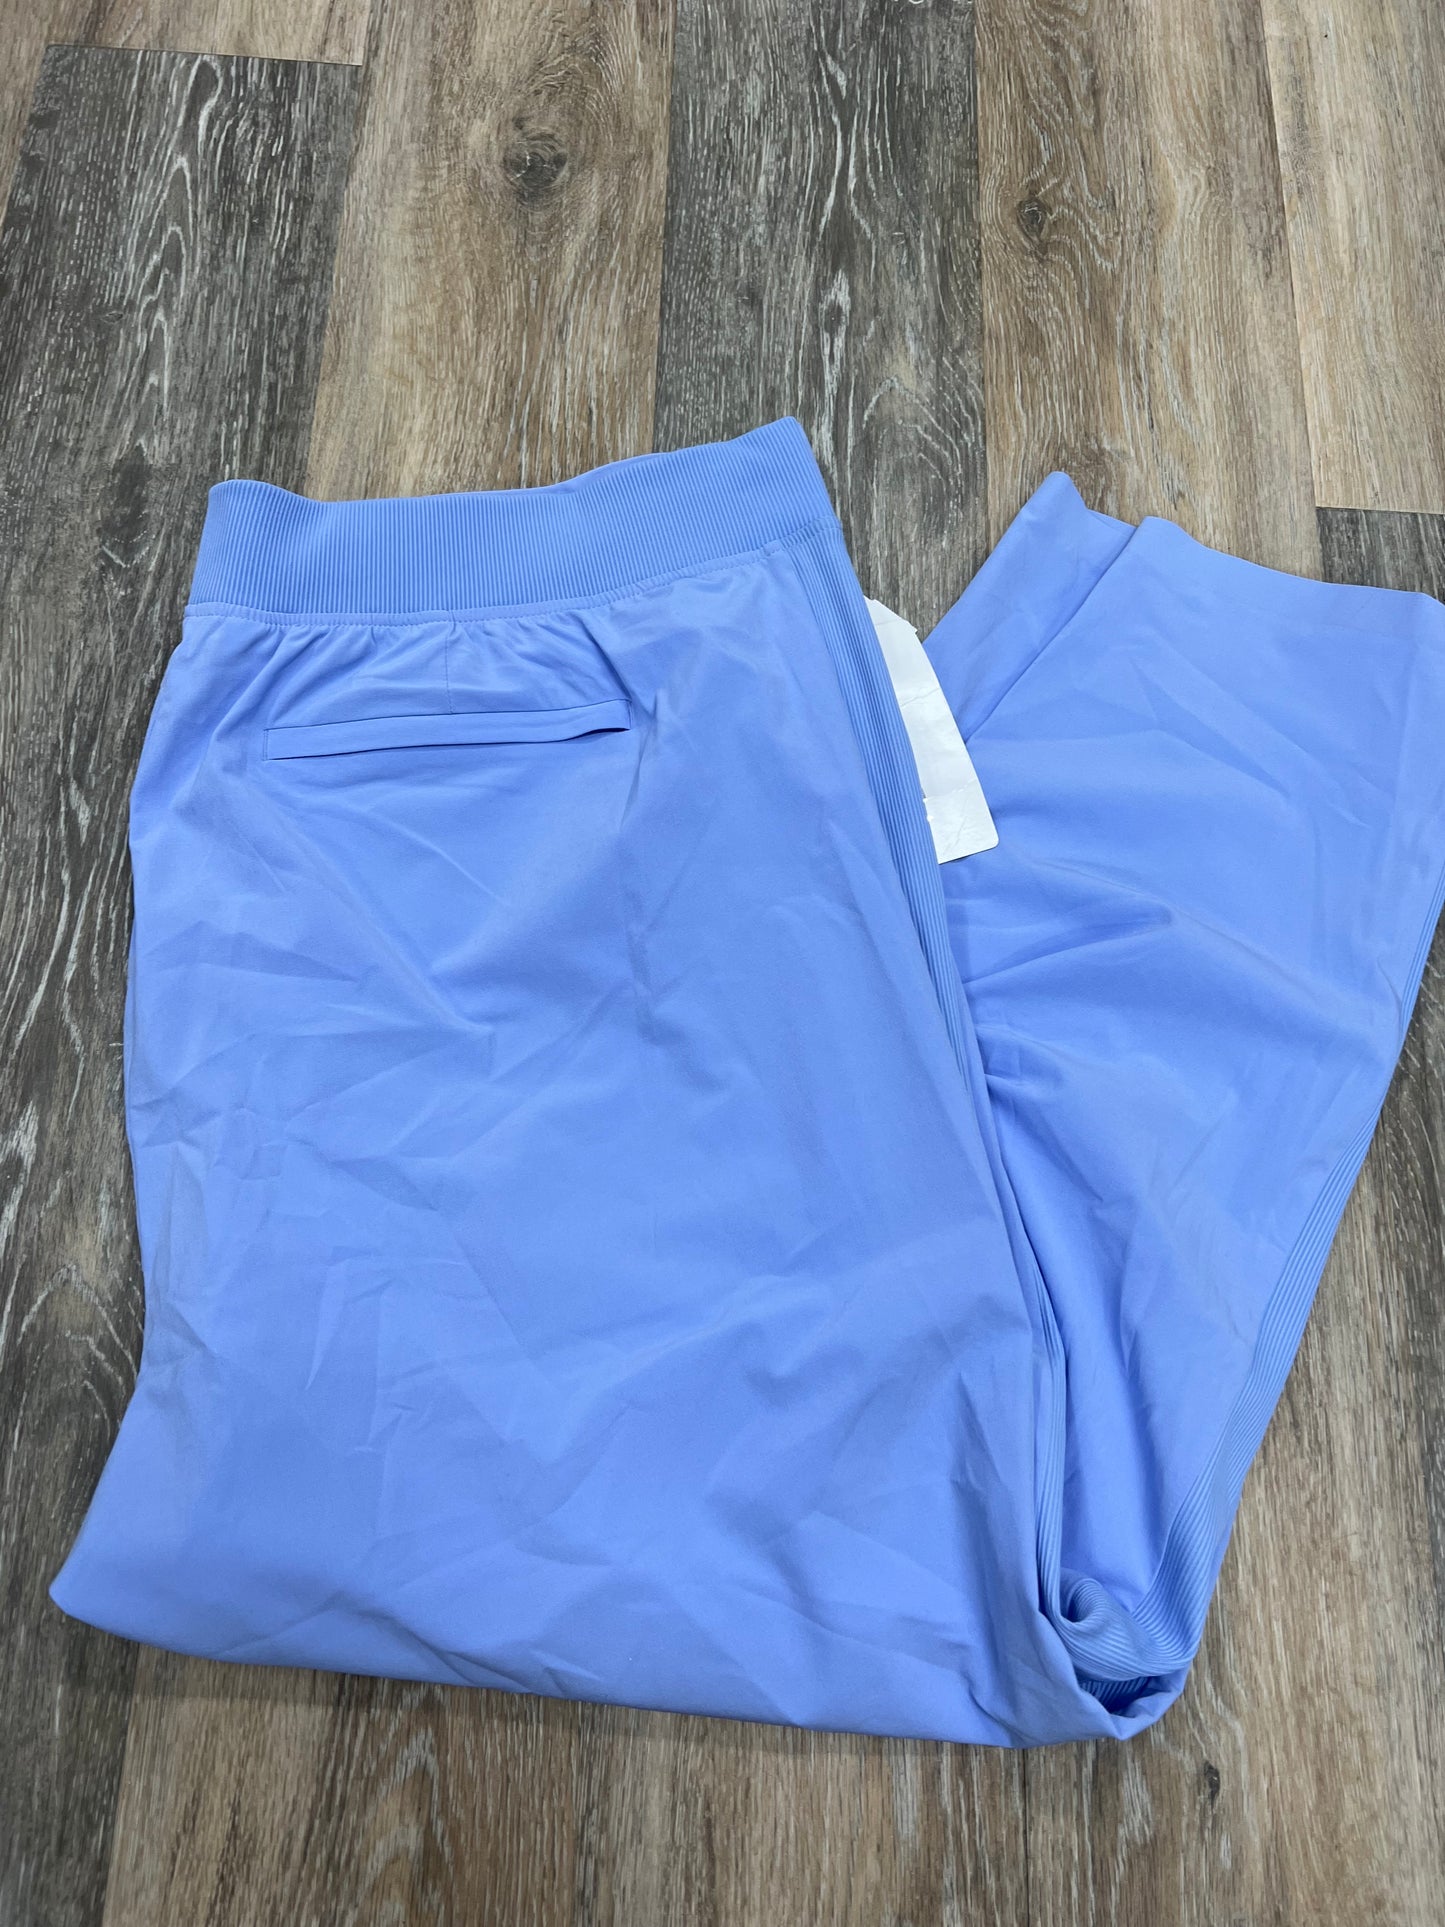 Athletic Pants By Athleta  Size: 20